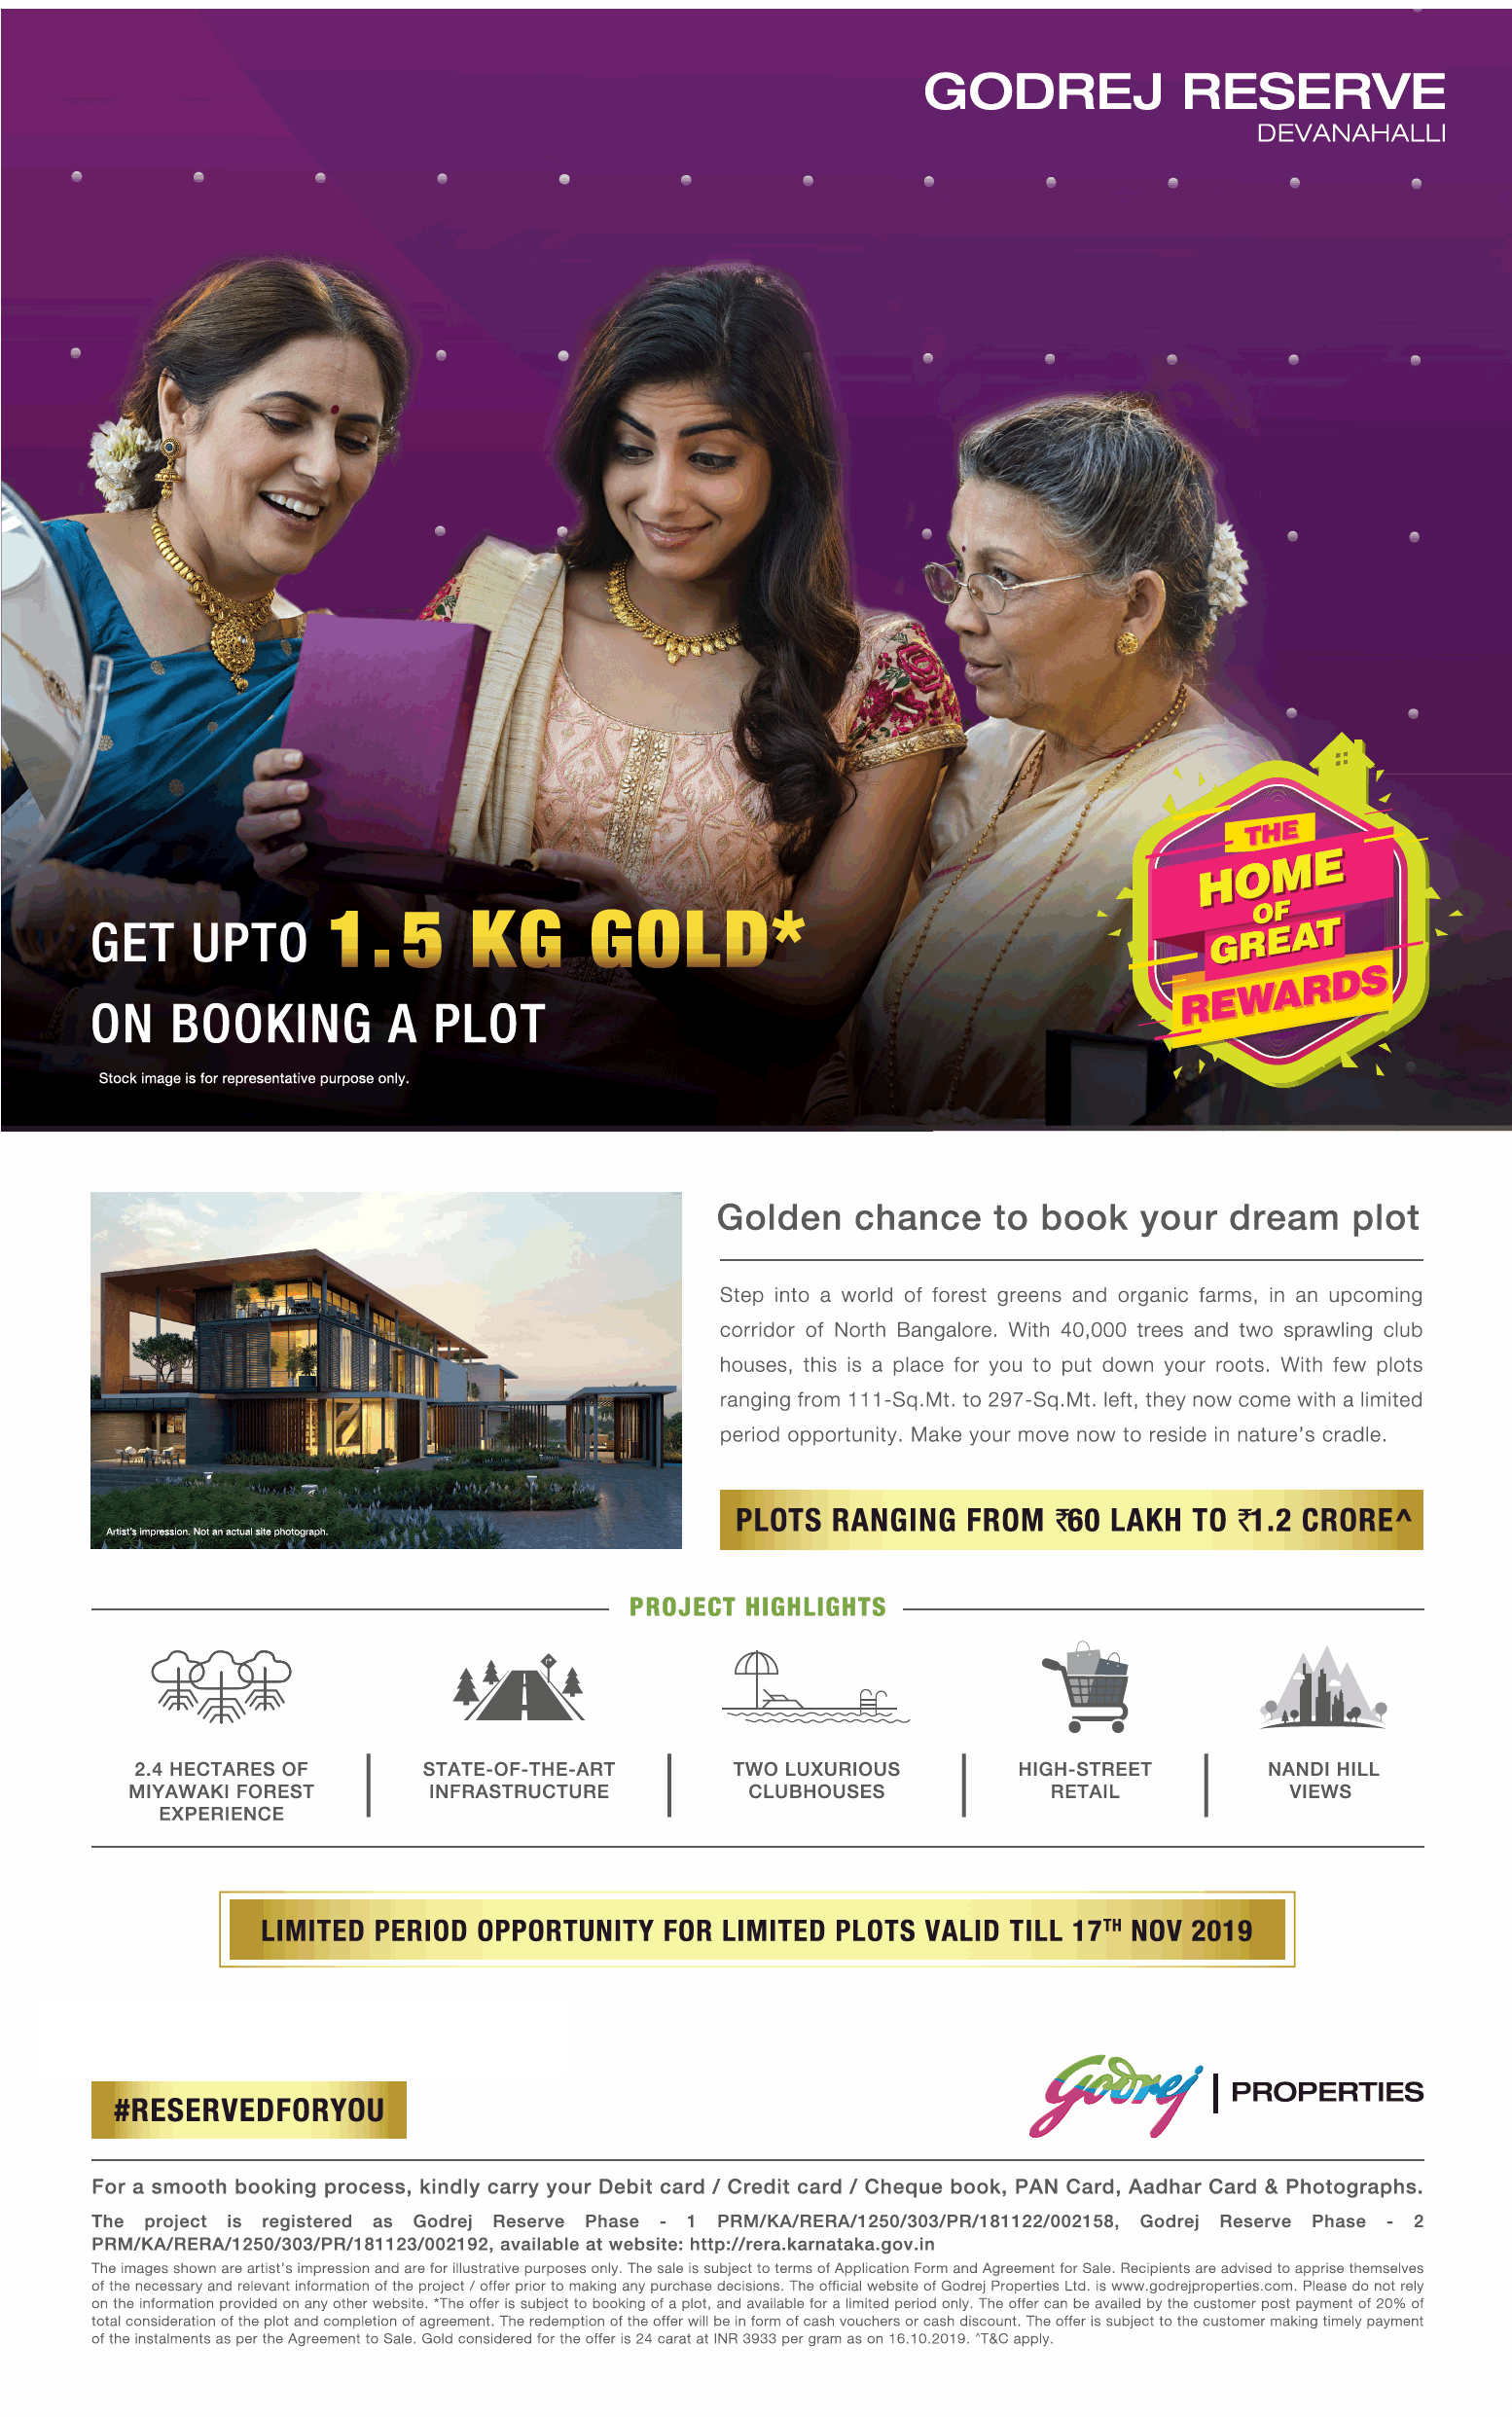 Get upto 1.5 KG gold on booking a plot at Godrej Reserve in Devanahalli, Bangalore Update